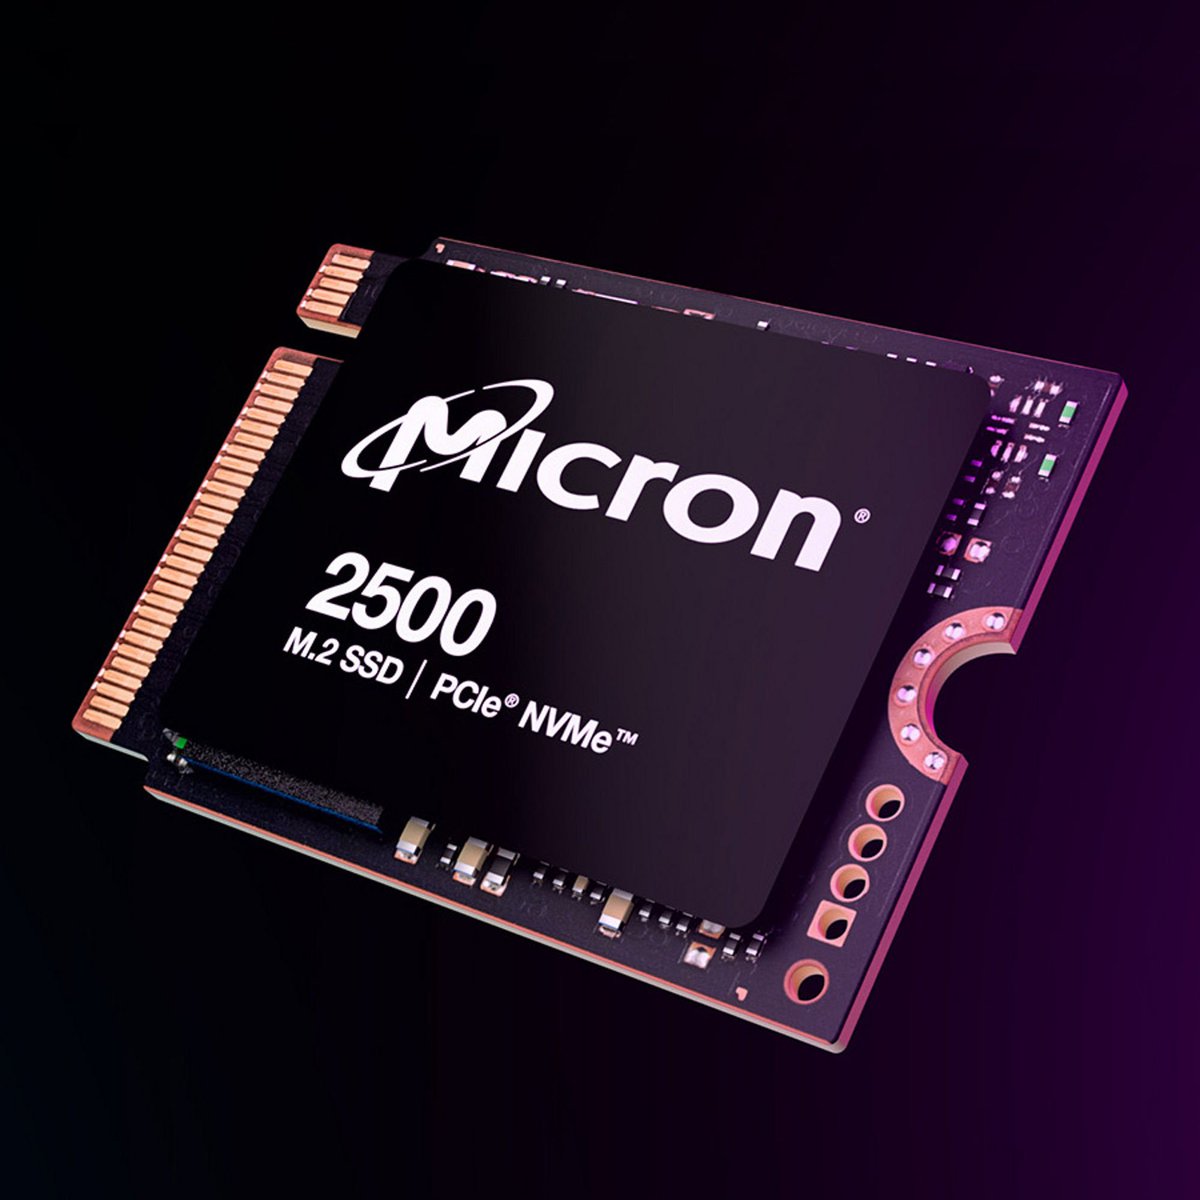 Chip maker company Micron sees India as a crucial element in its future strategy
- Micron is establishing an ATMP (assembly, testing, and packaging) facility in Sanand, Gujarat
- The company started its operations in India in 2018
#Micron #India